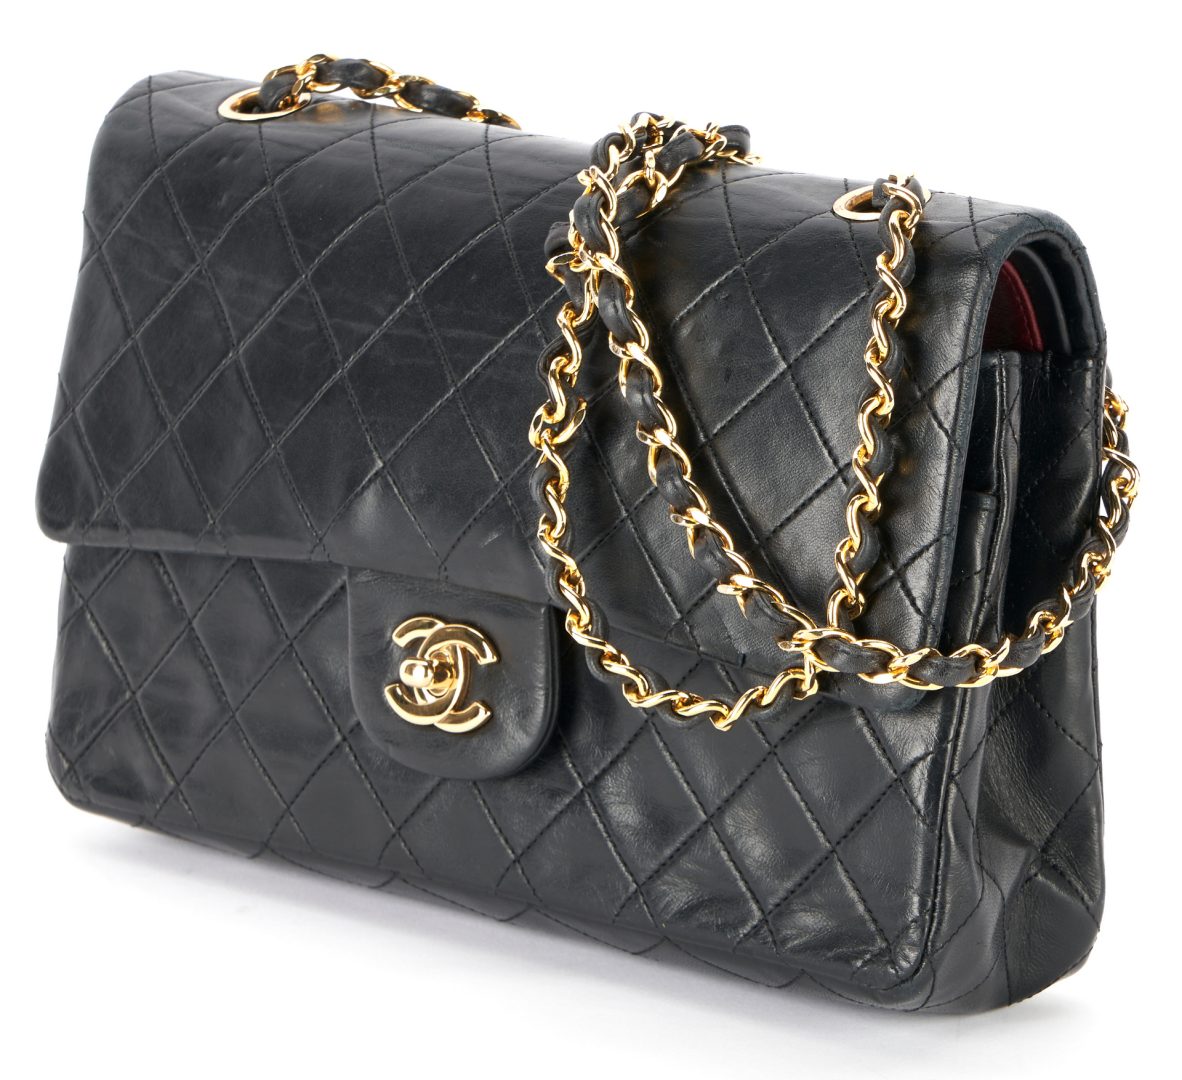 Lot 529: Chanel Classic Double Flap Quilted Black Leather Bag